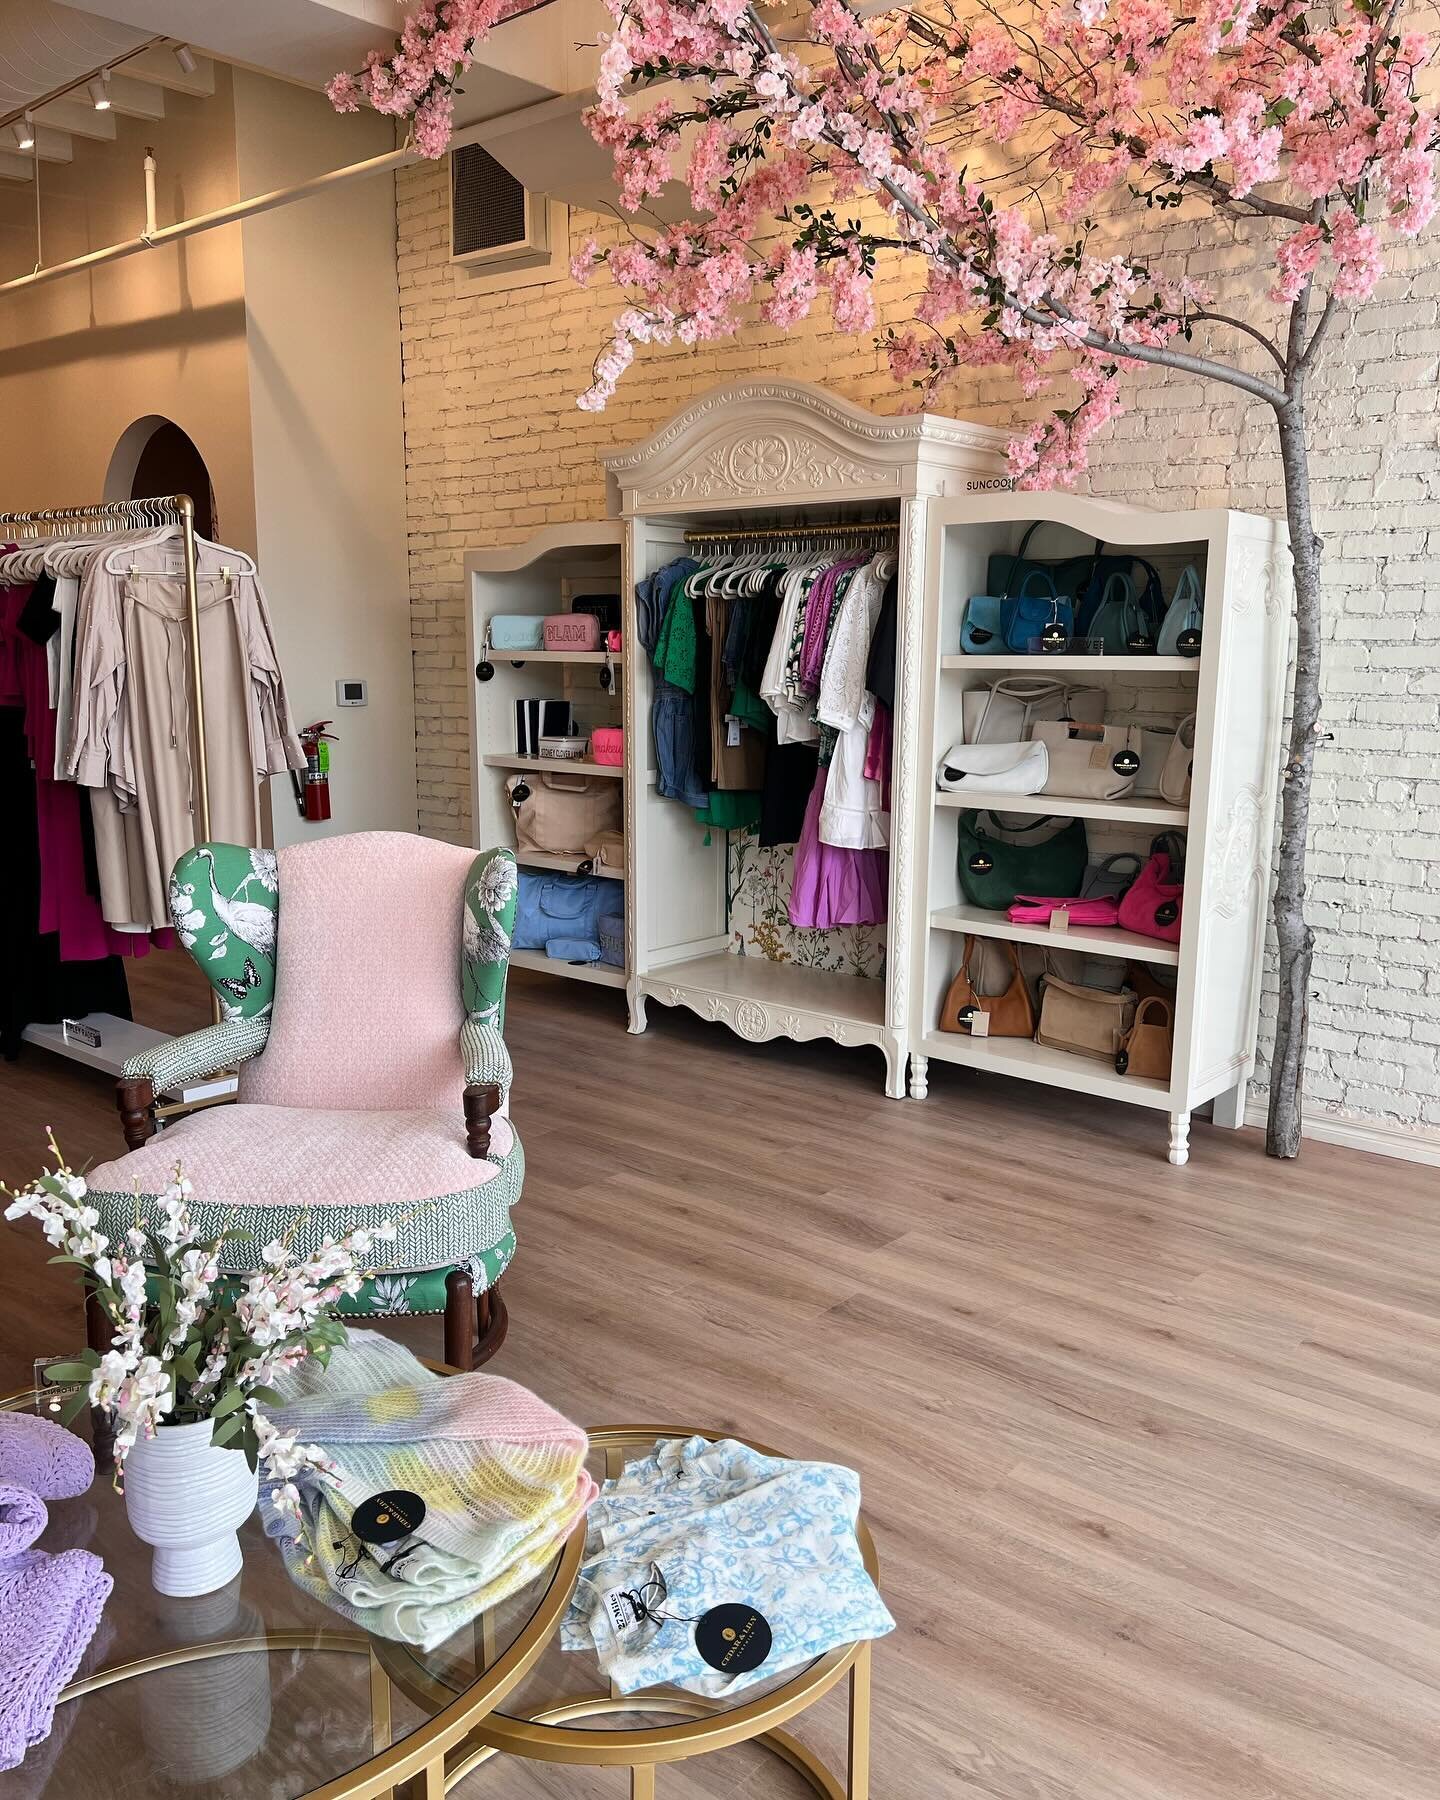 We are so ready for the grand opening! 🛍️✨🤍 Mark your calendars for Saturday and see you there!